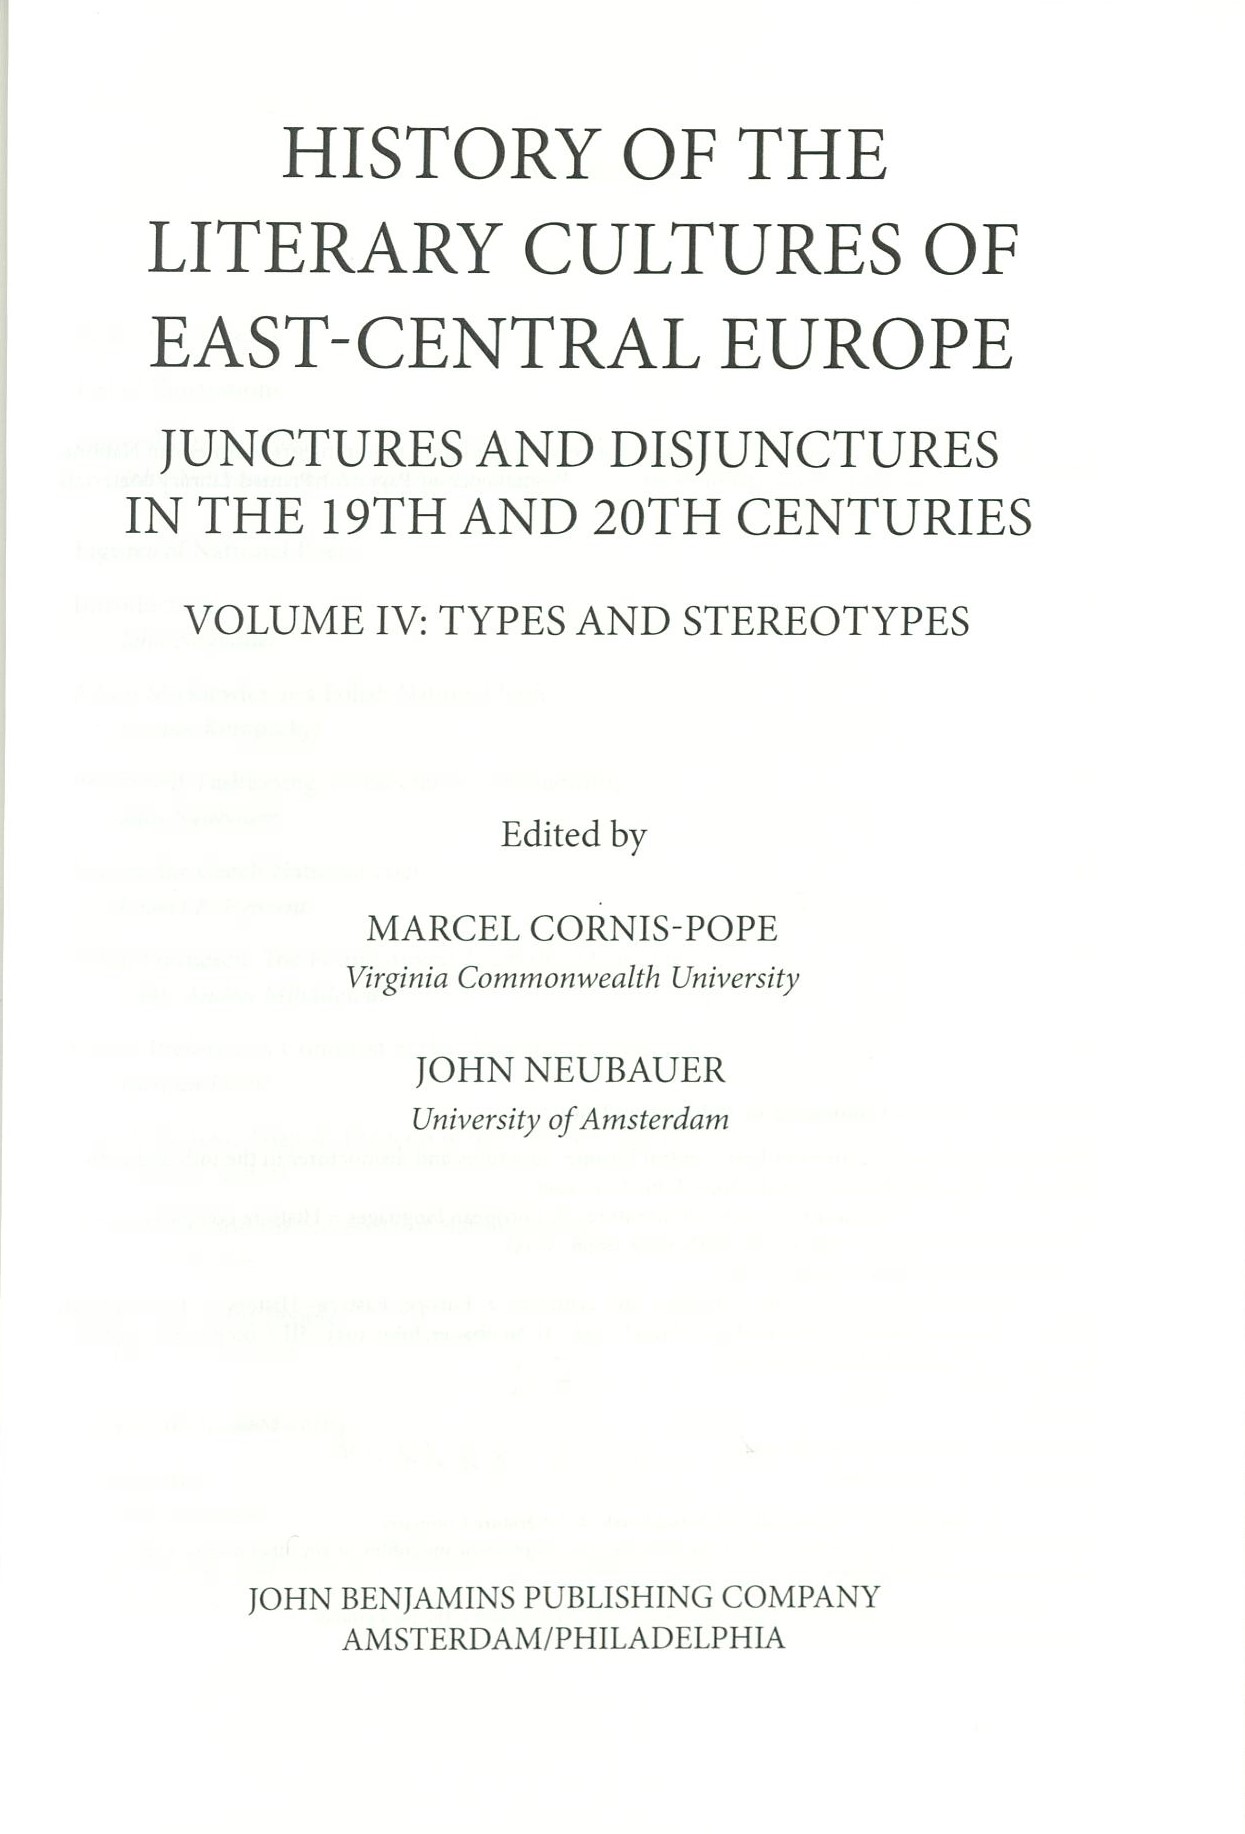 ''History of the literary cultures of East-Central Europe''